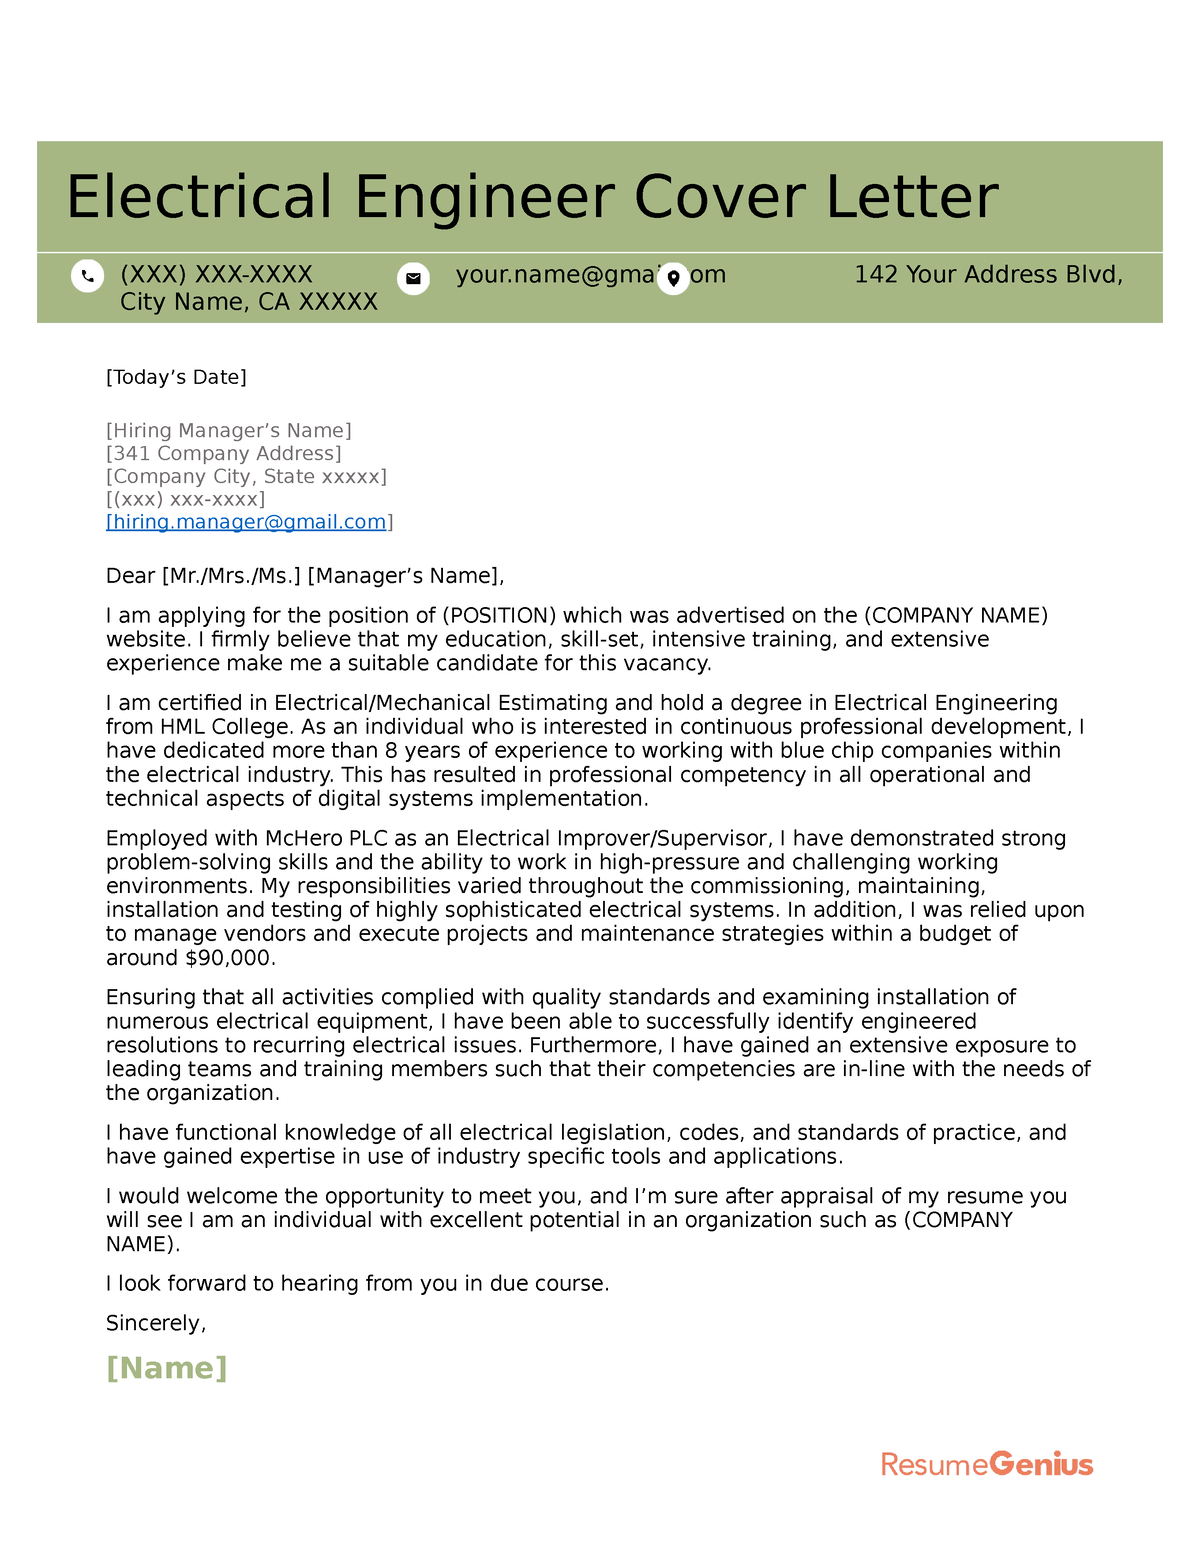 Electrical engineer cover letter example - Electrical Engineer Cover ...